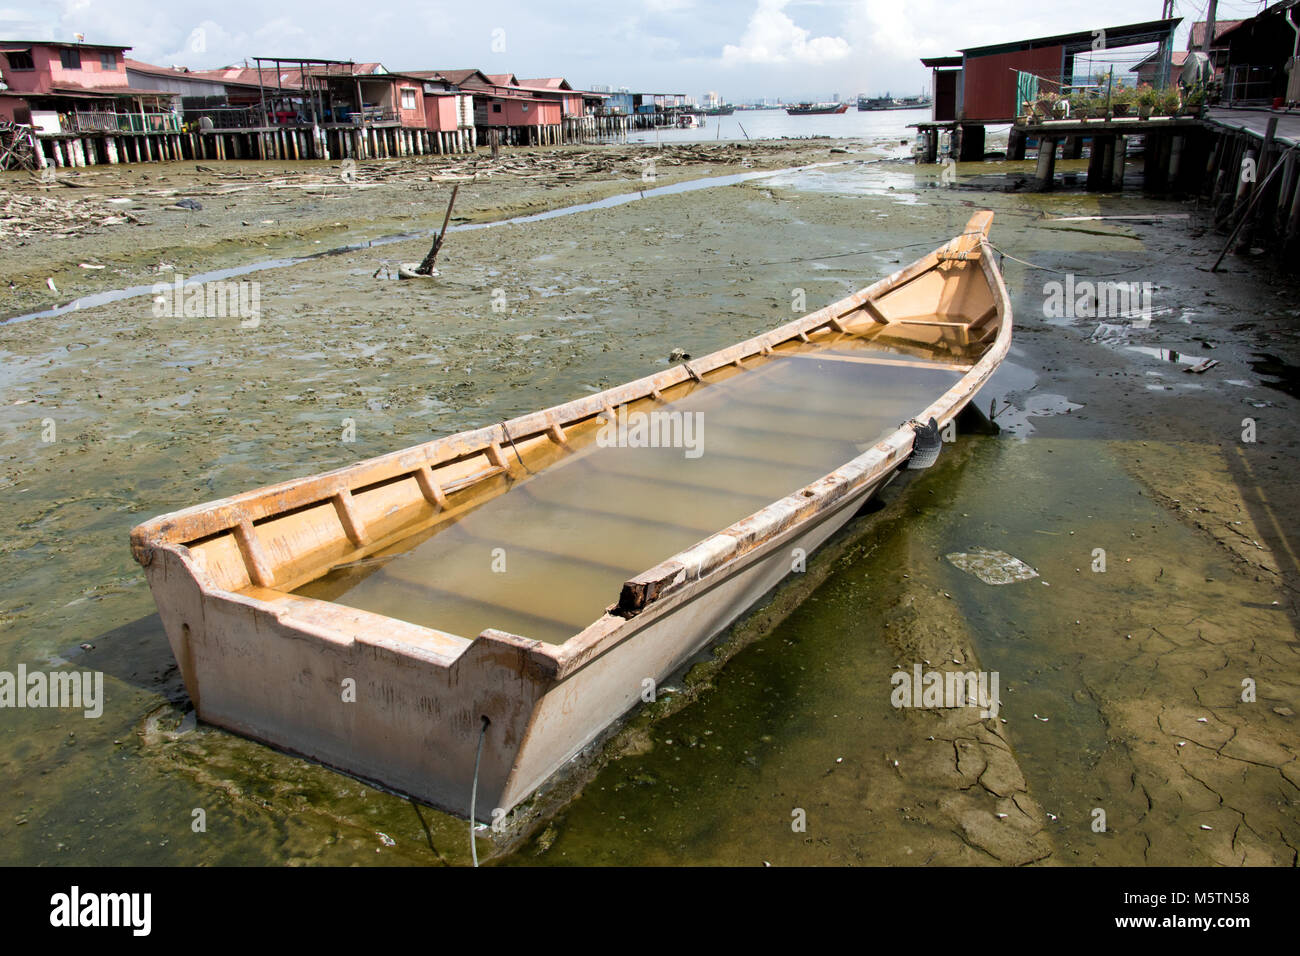 Flooded ship in mud at village on pillars. Abandoned boat at Clan Jetties of George Town, Penang, Malaysia. Stock Photo